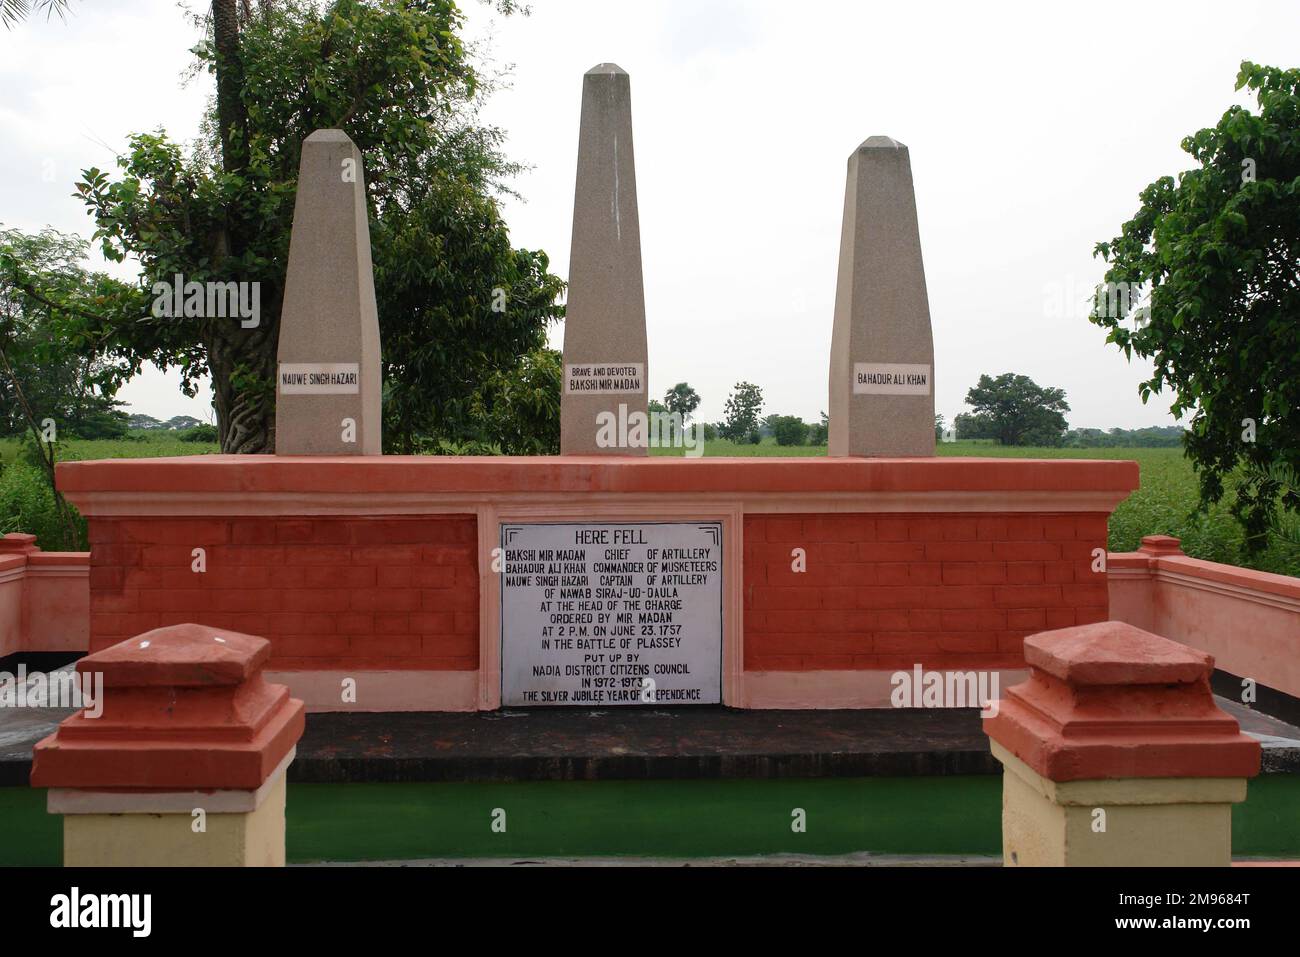 Memorial obelisk to the Battle of Plassey (23 June 1757), West Bengal, India. The battle established British rule in India for the next 90 years. It took place at Palashi, West Bengal. Stock Photo